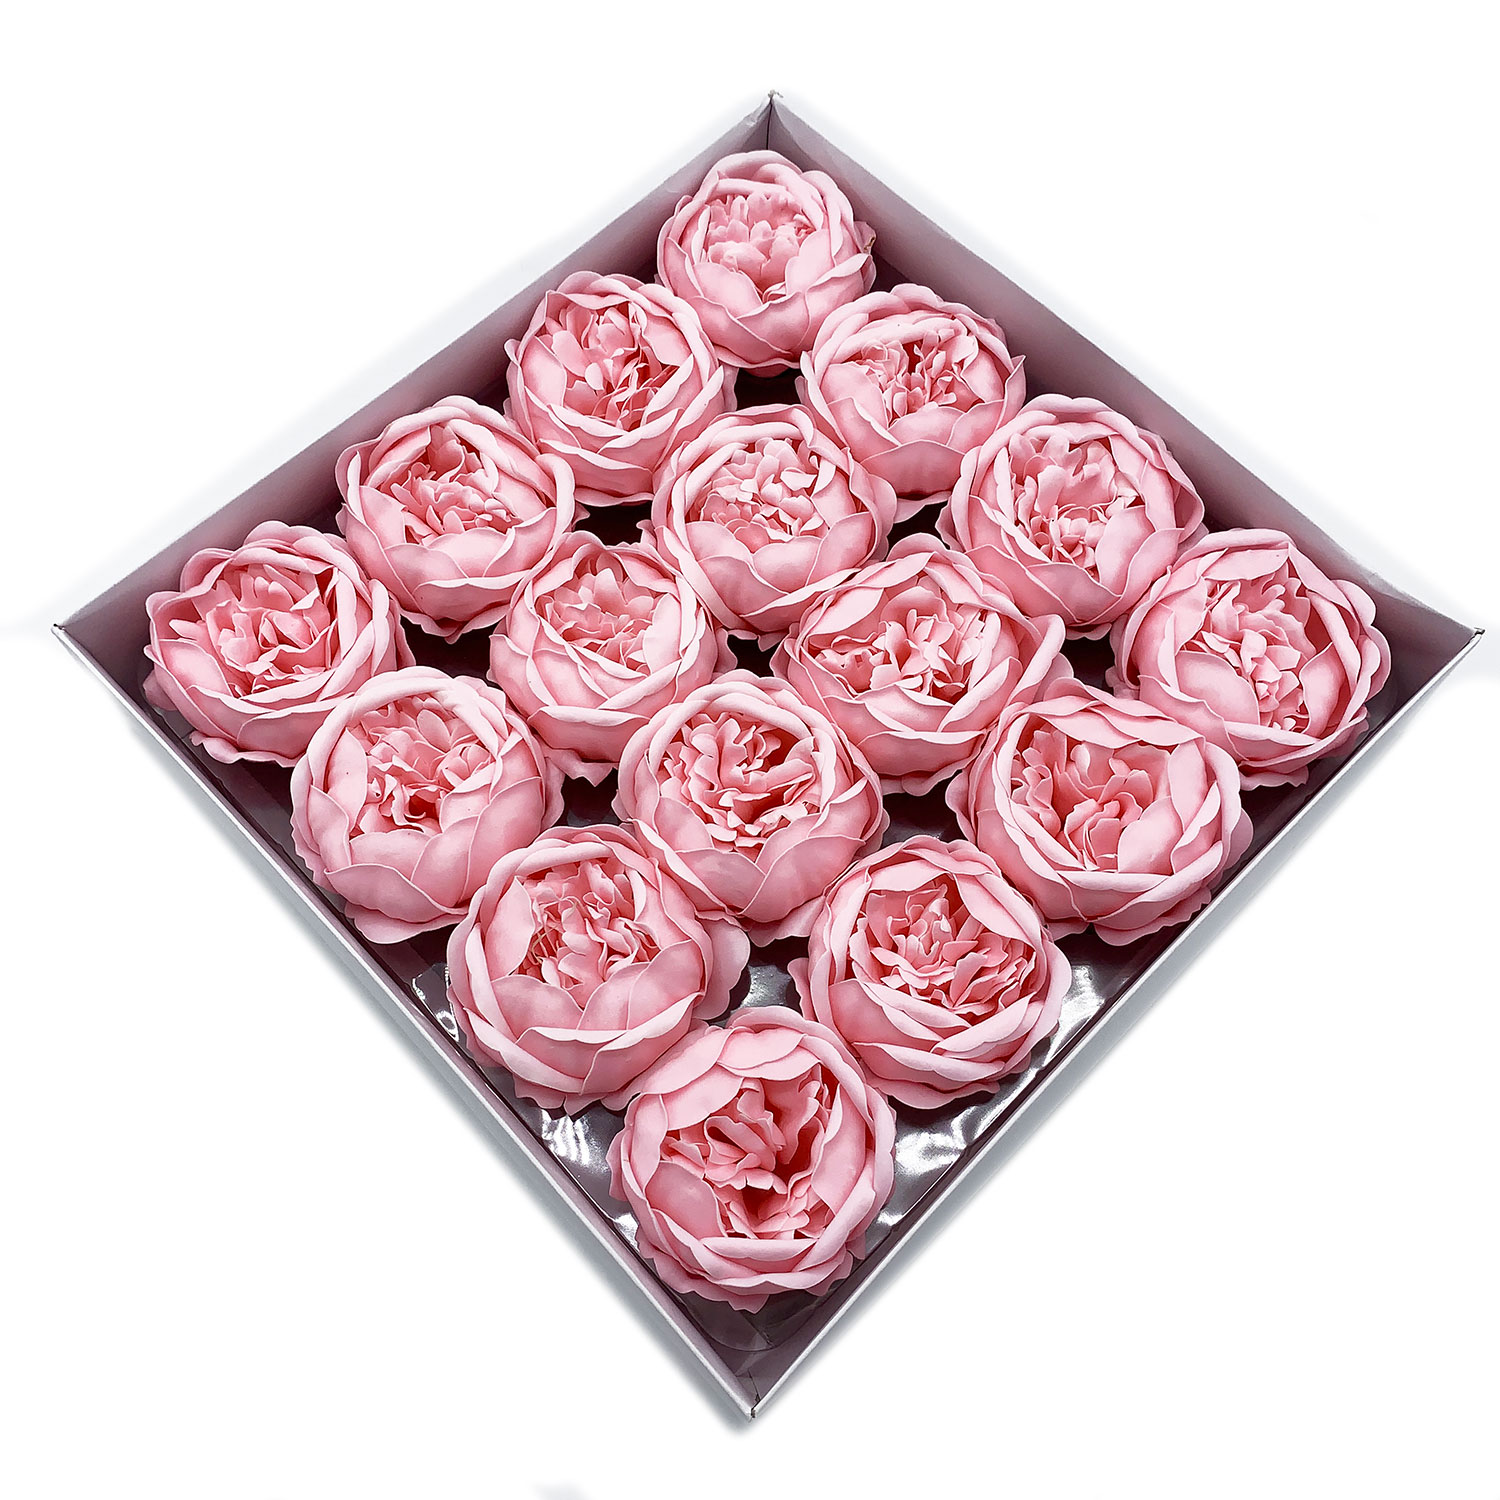 10 x Craft Soap Flowers - Ext Large Peony - Pink